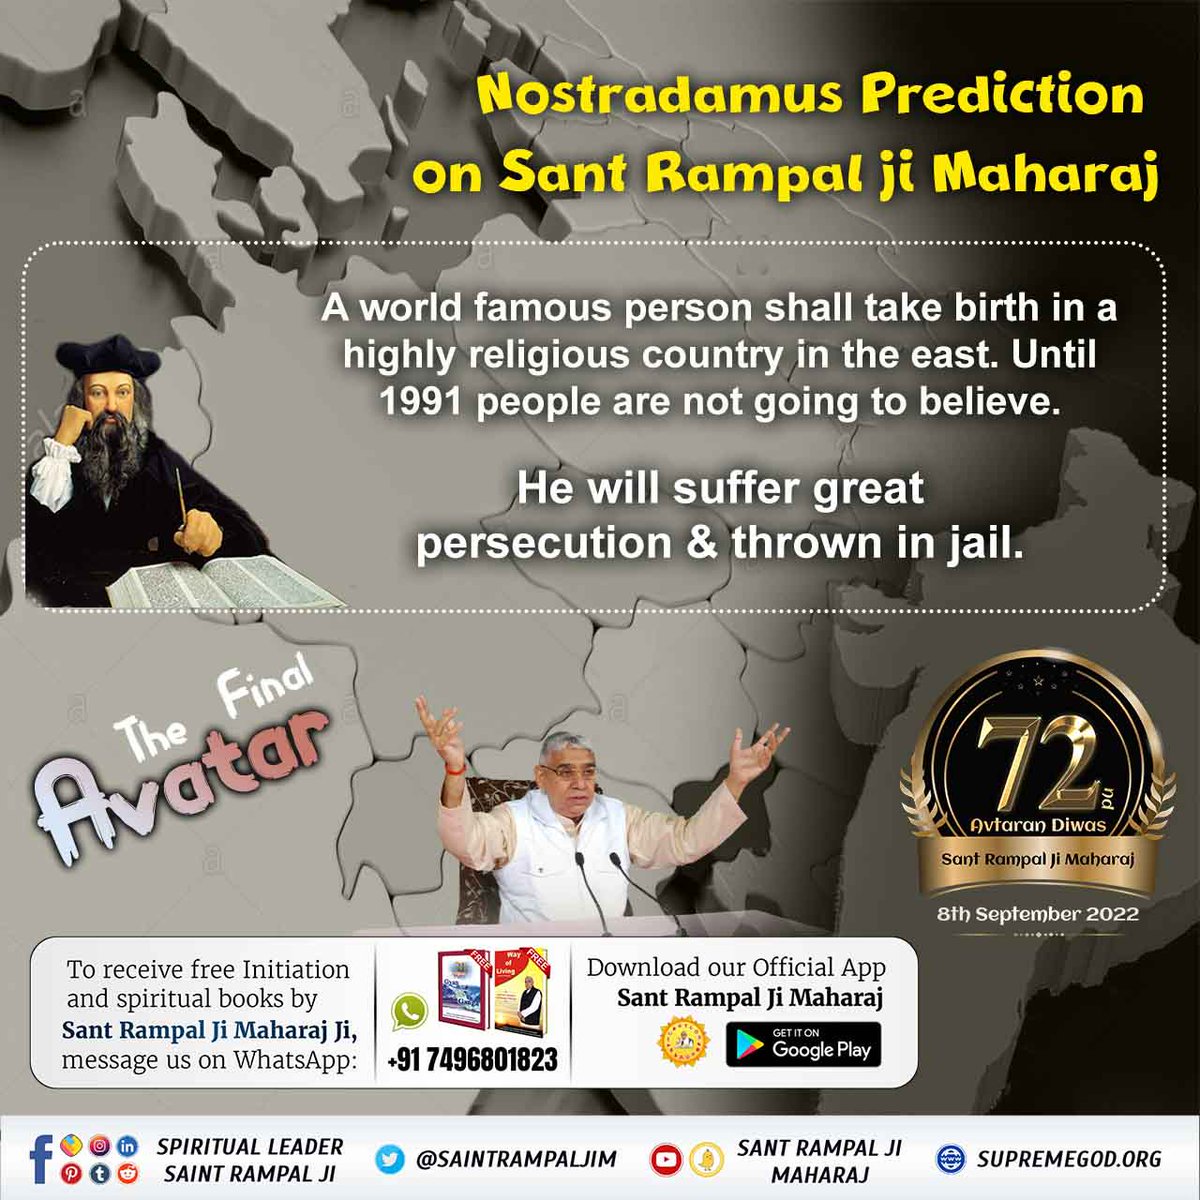 #GodNightThursday 
Nostradamus Prediction on Sant Rampal ji Maharaj
A world famous person shall take birth in a highly religious country in the east. Until 1991 people are not going to believe.
He will suffer great persecution & thrown in jail.#pmtvillanueva #Origin #Wordle